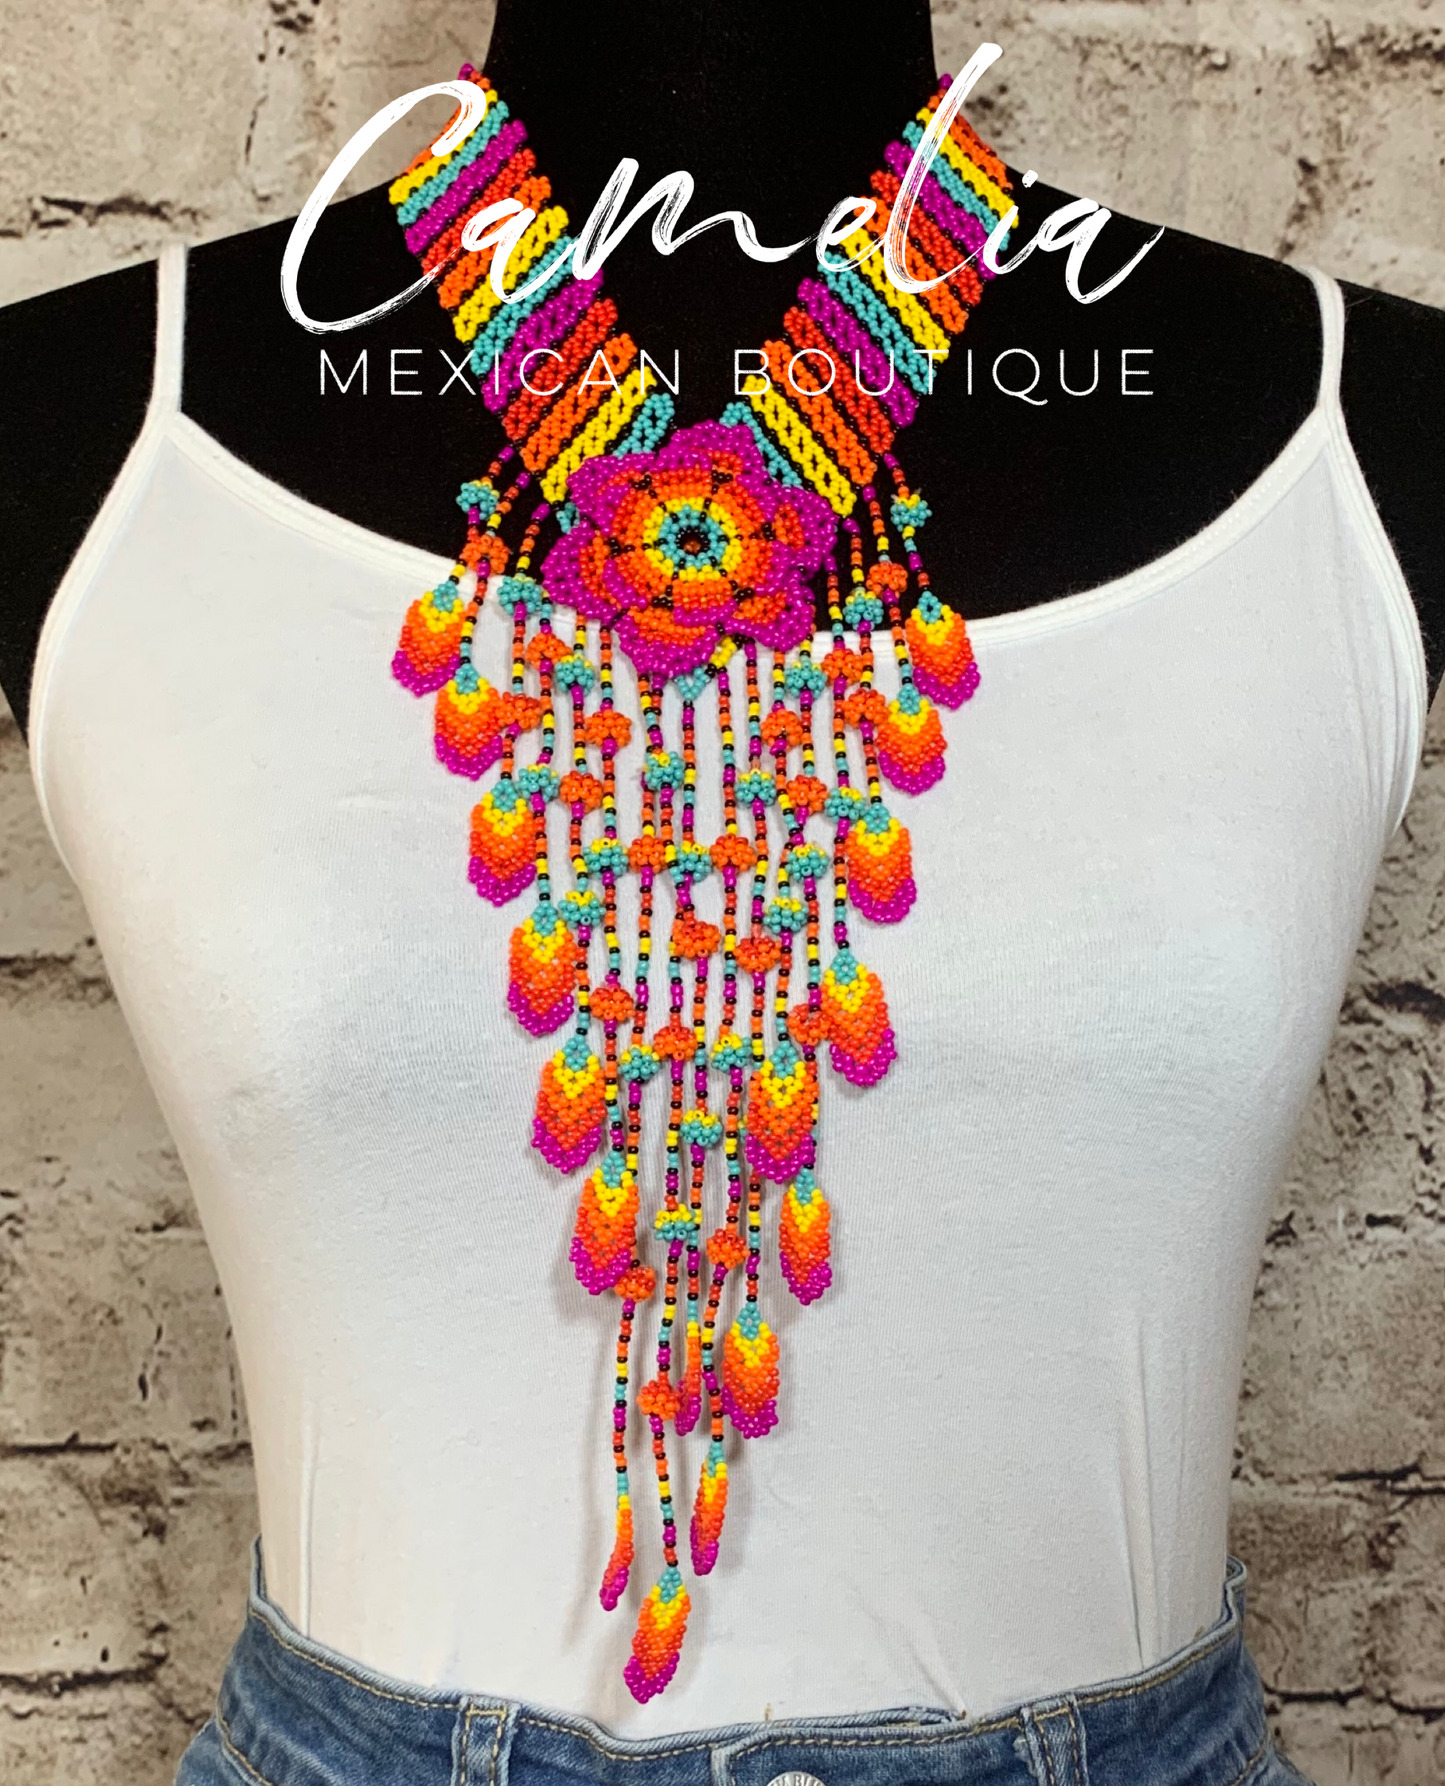 Huichol Mexican Beaded Necklace Set - Flower